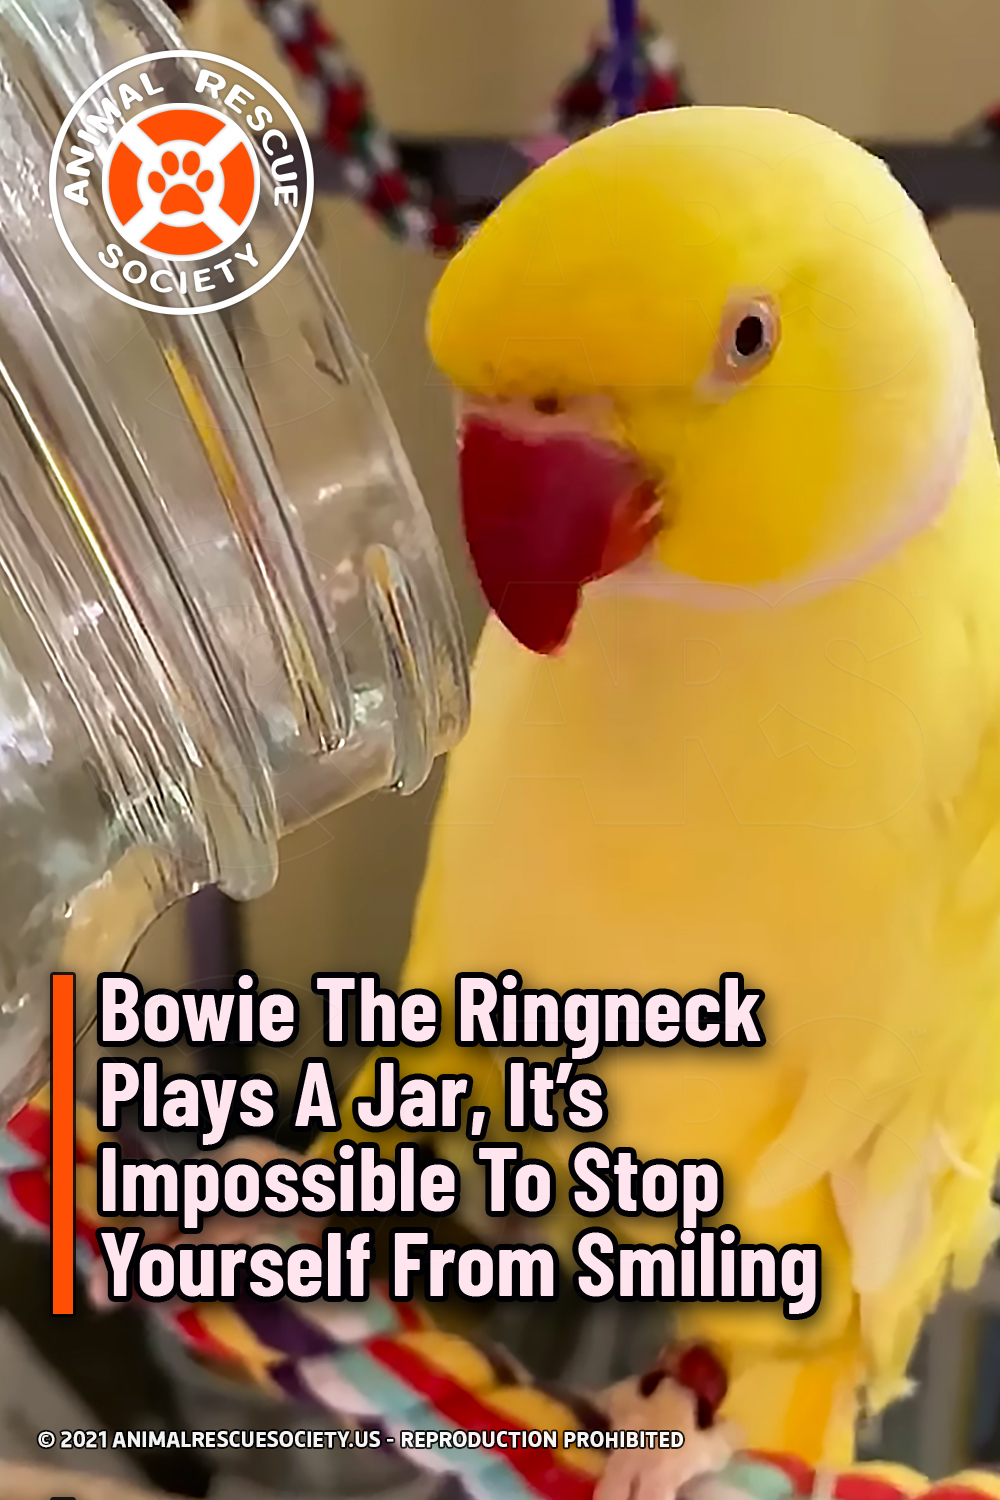 Bowie The Ringneck Plays A Jar, It’s Impossible To Stop Yourself From Smiling